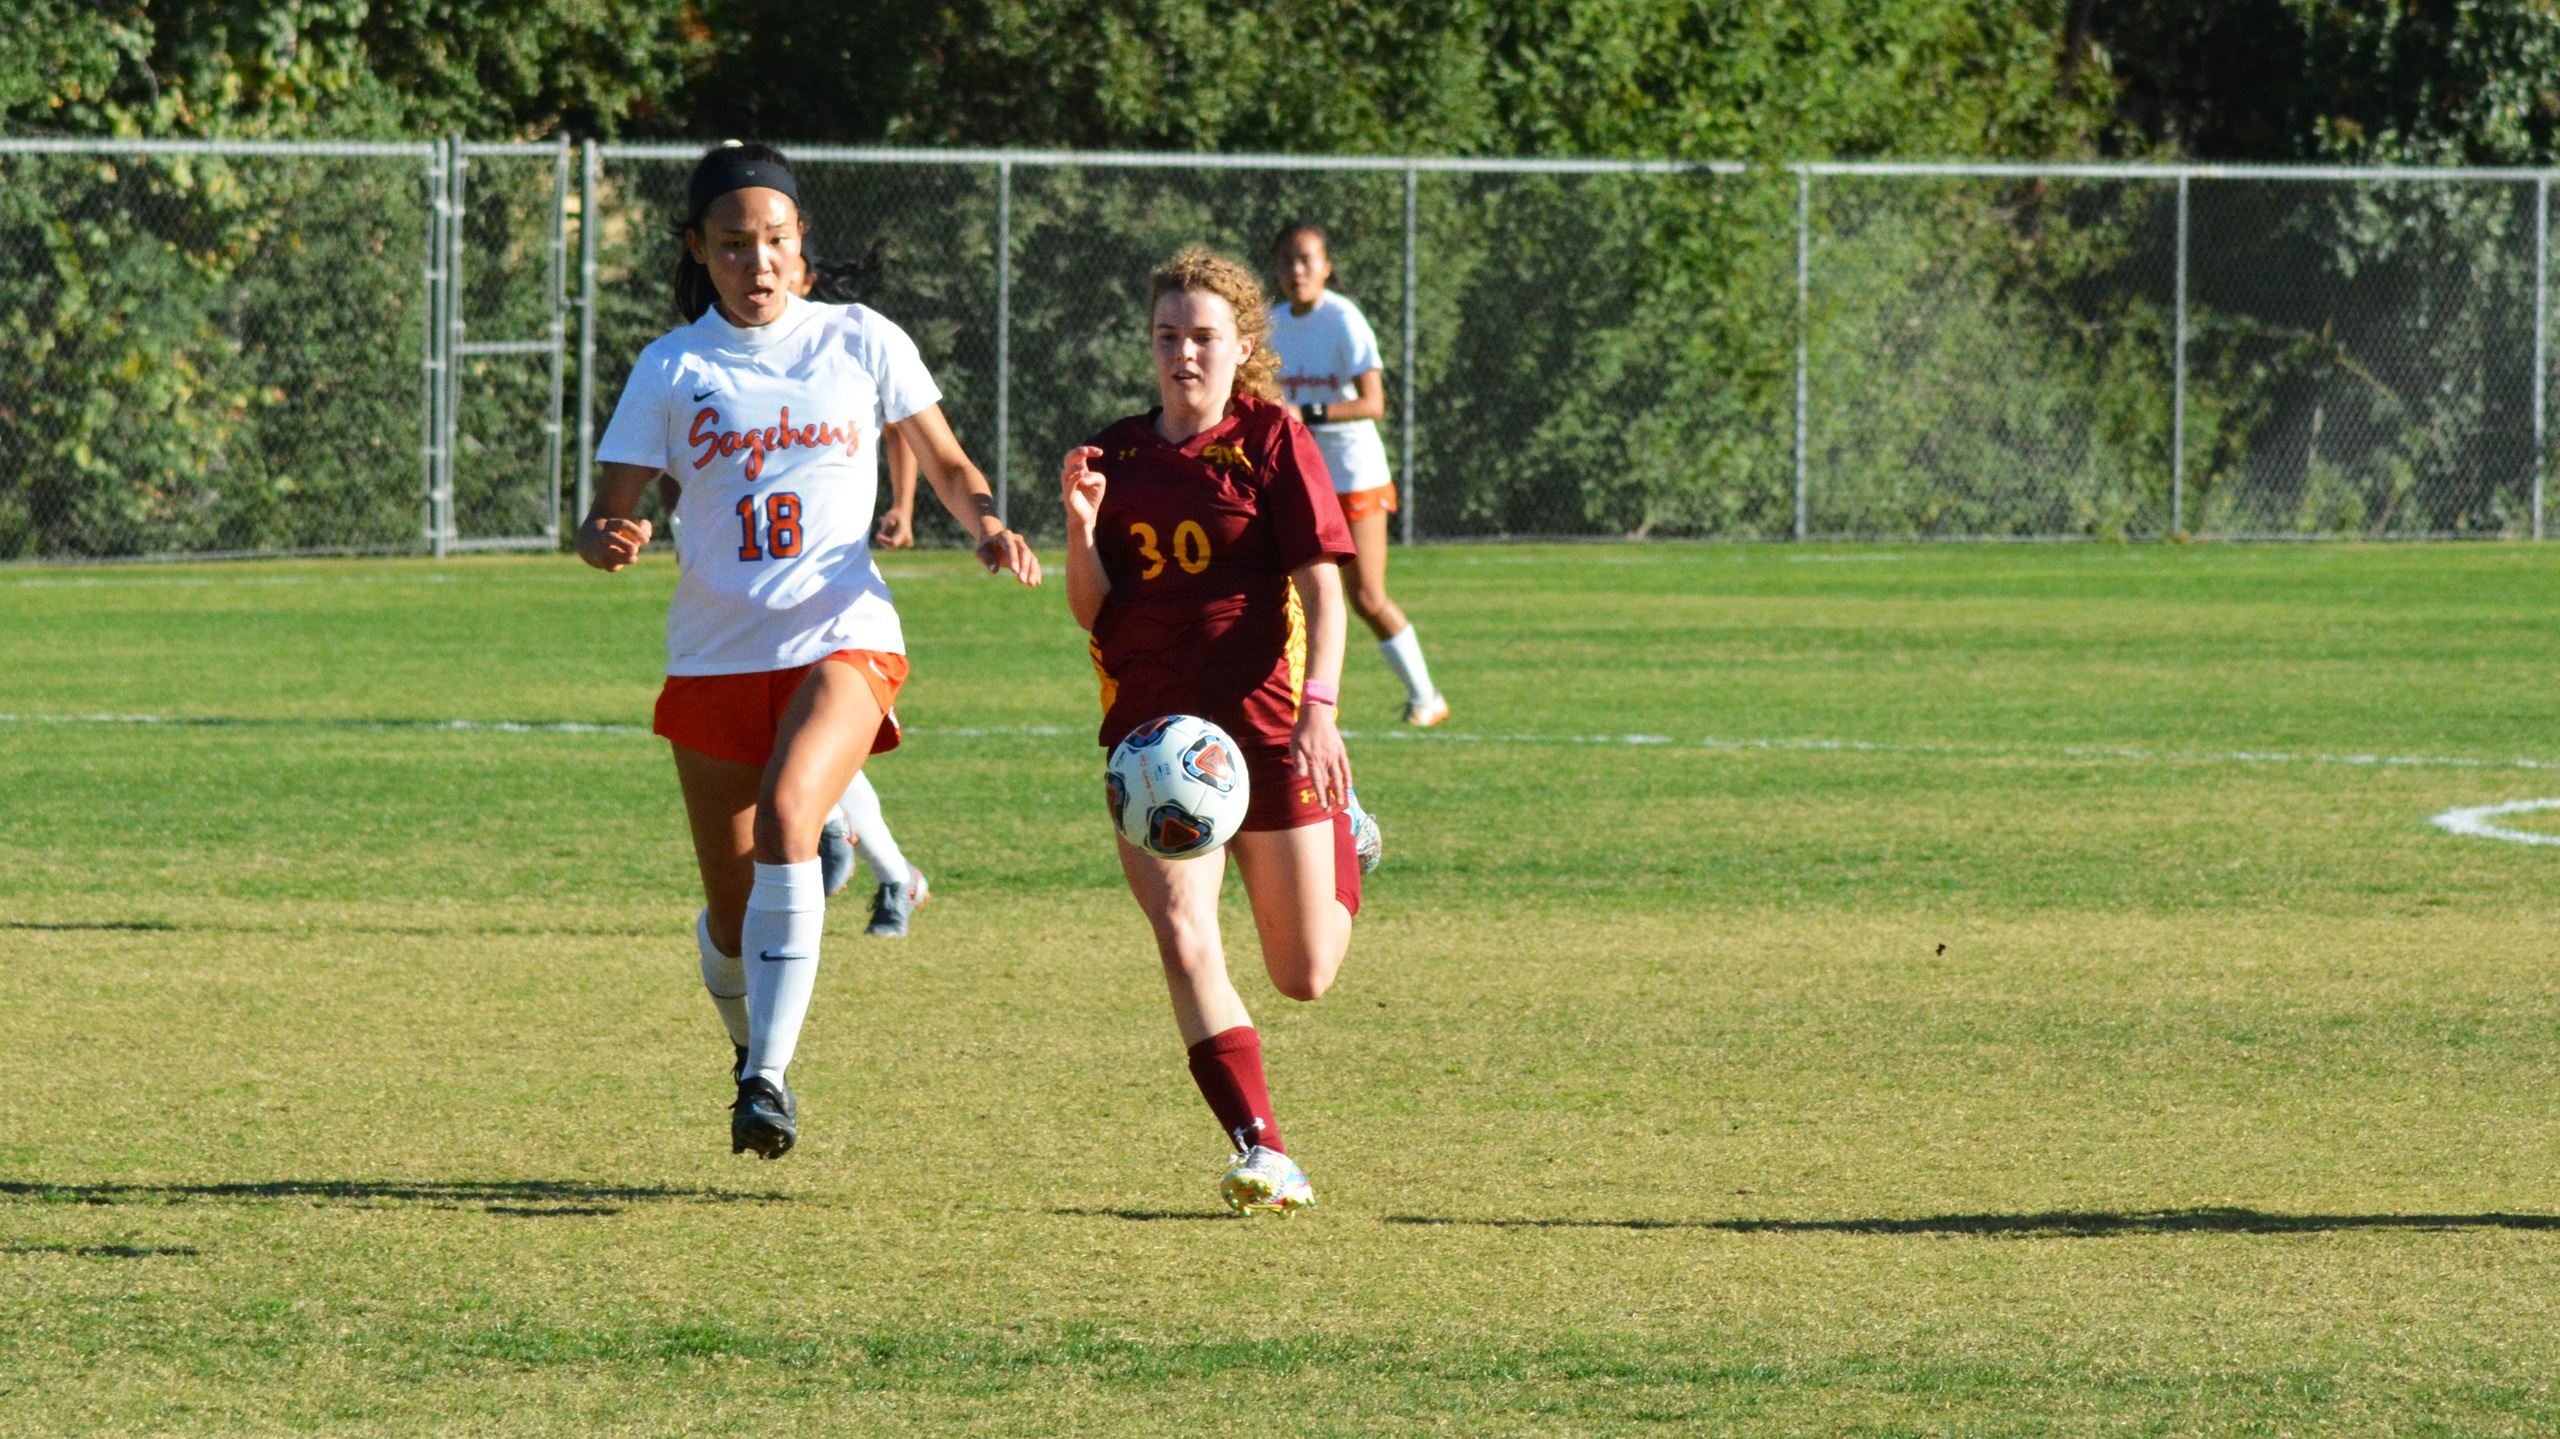 Sam Ryan nearly created an early goal with her pressure in the offensive third